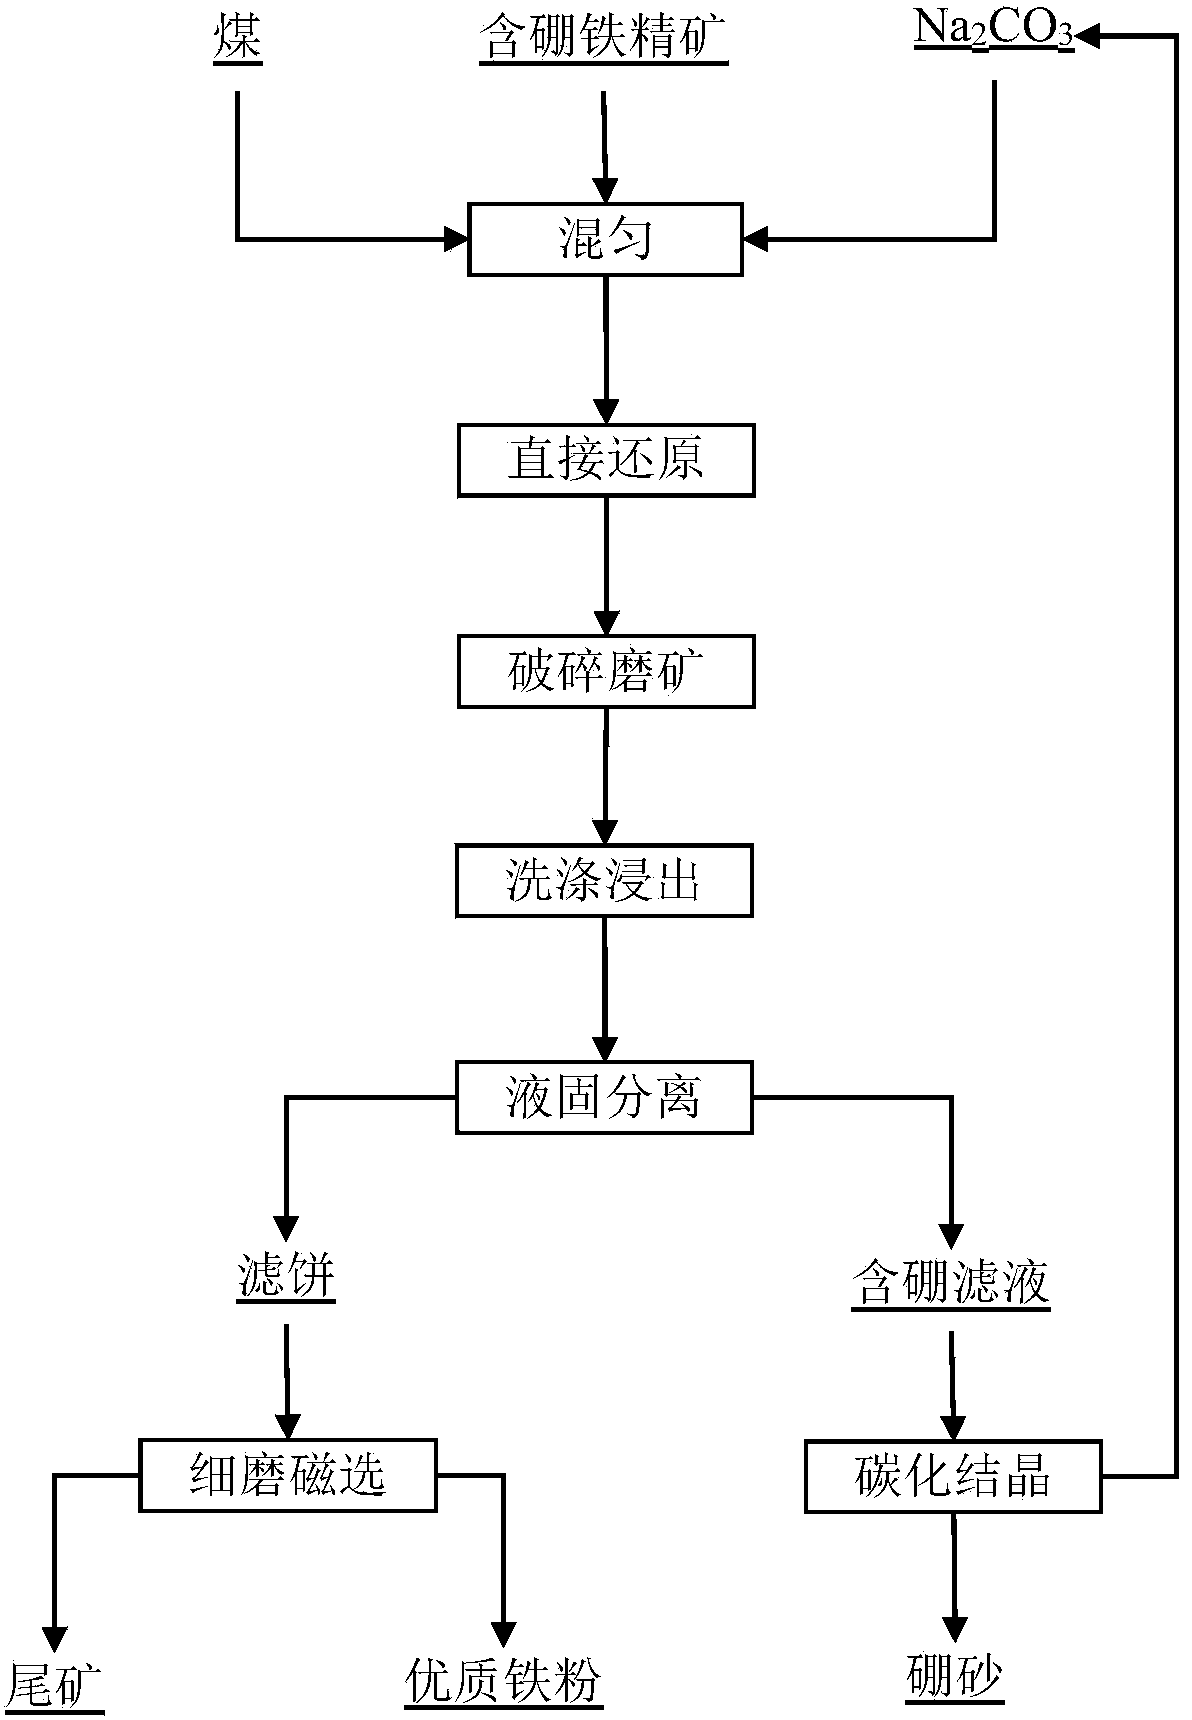 Method for extracting high-quality iron powder and borax from paigeite